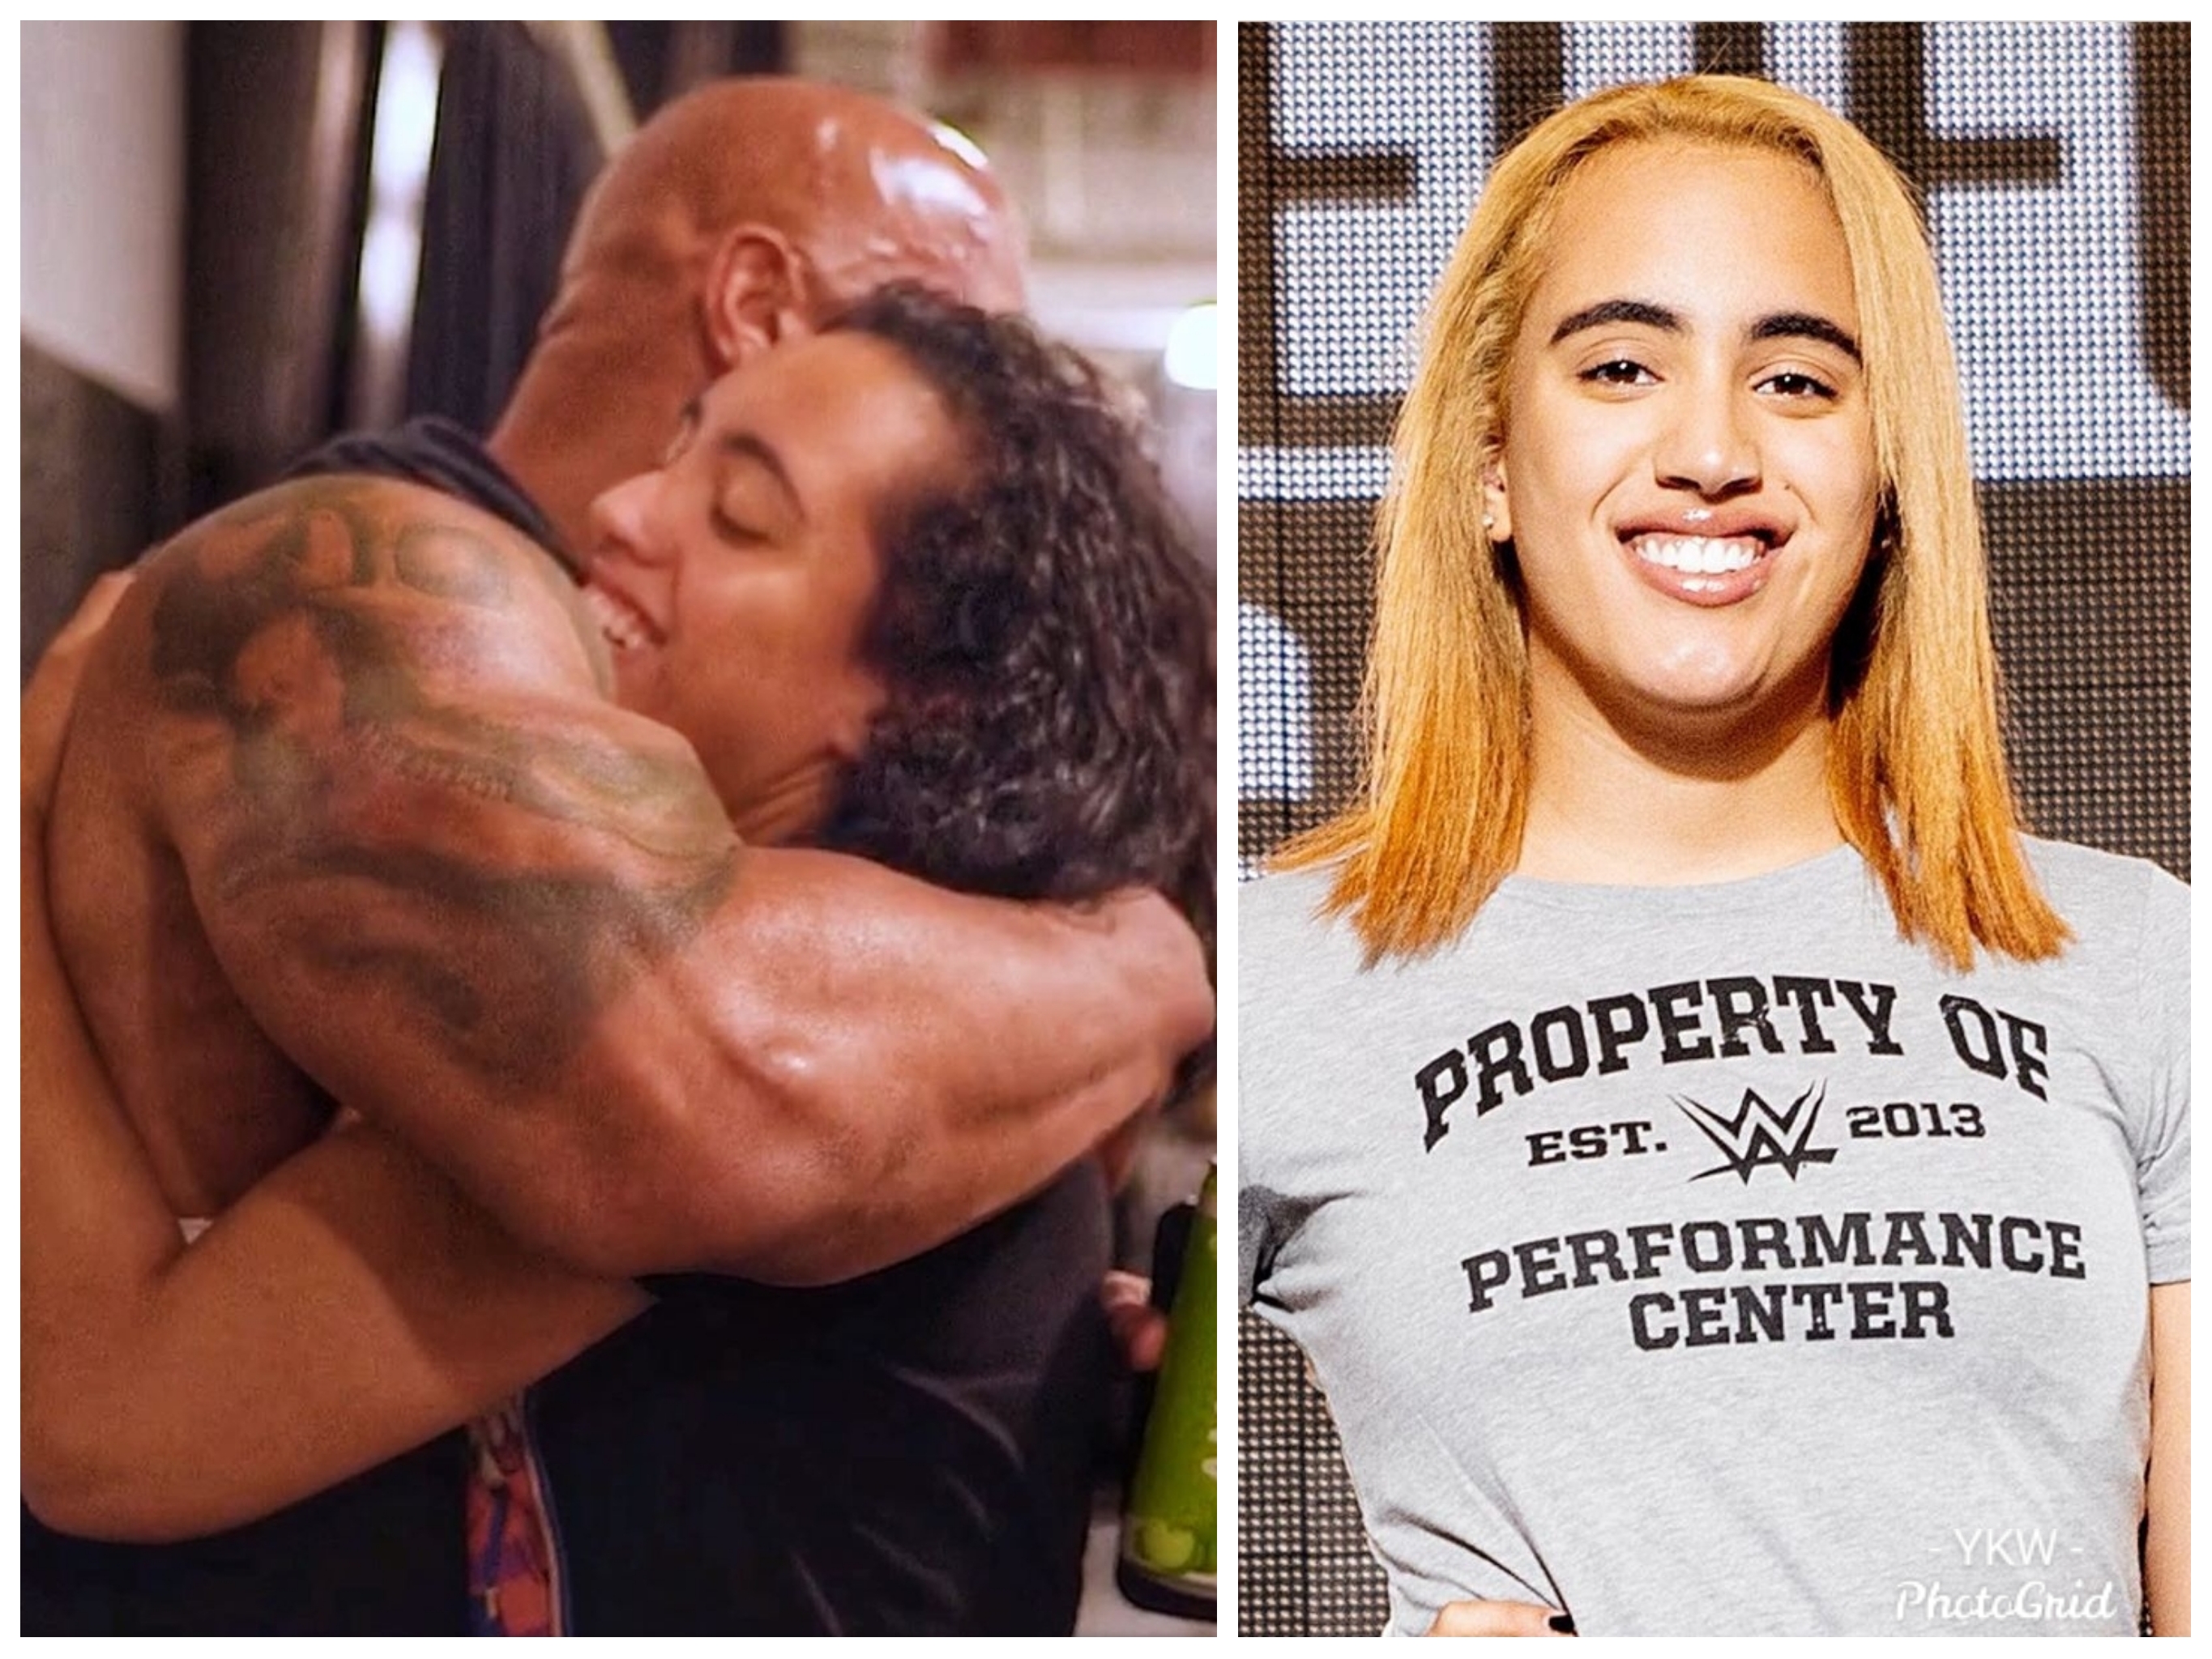 The Rock’s Daughter Simone Johnson Signs Deal With WWE, Making Her The 4th Generation Wrestler